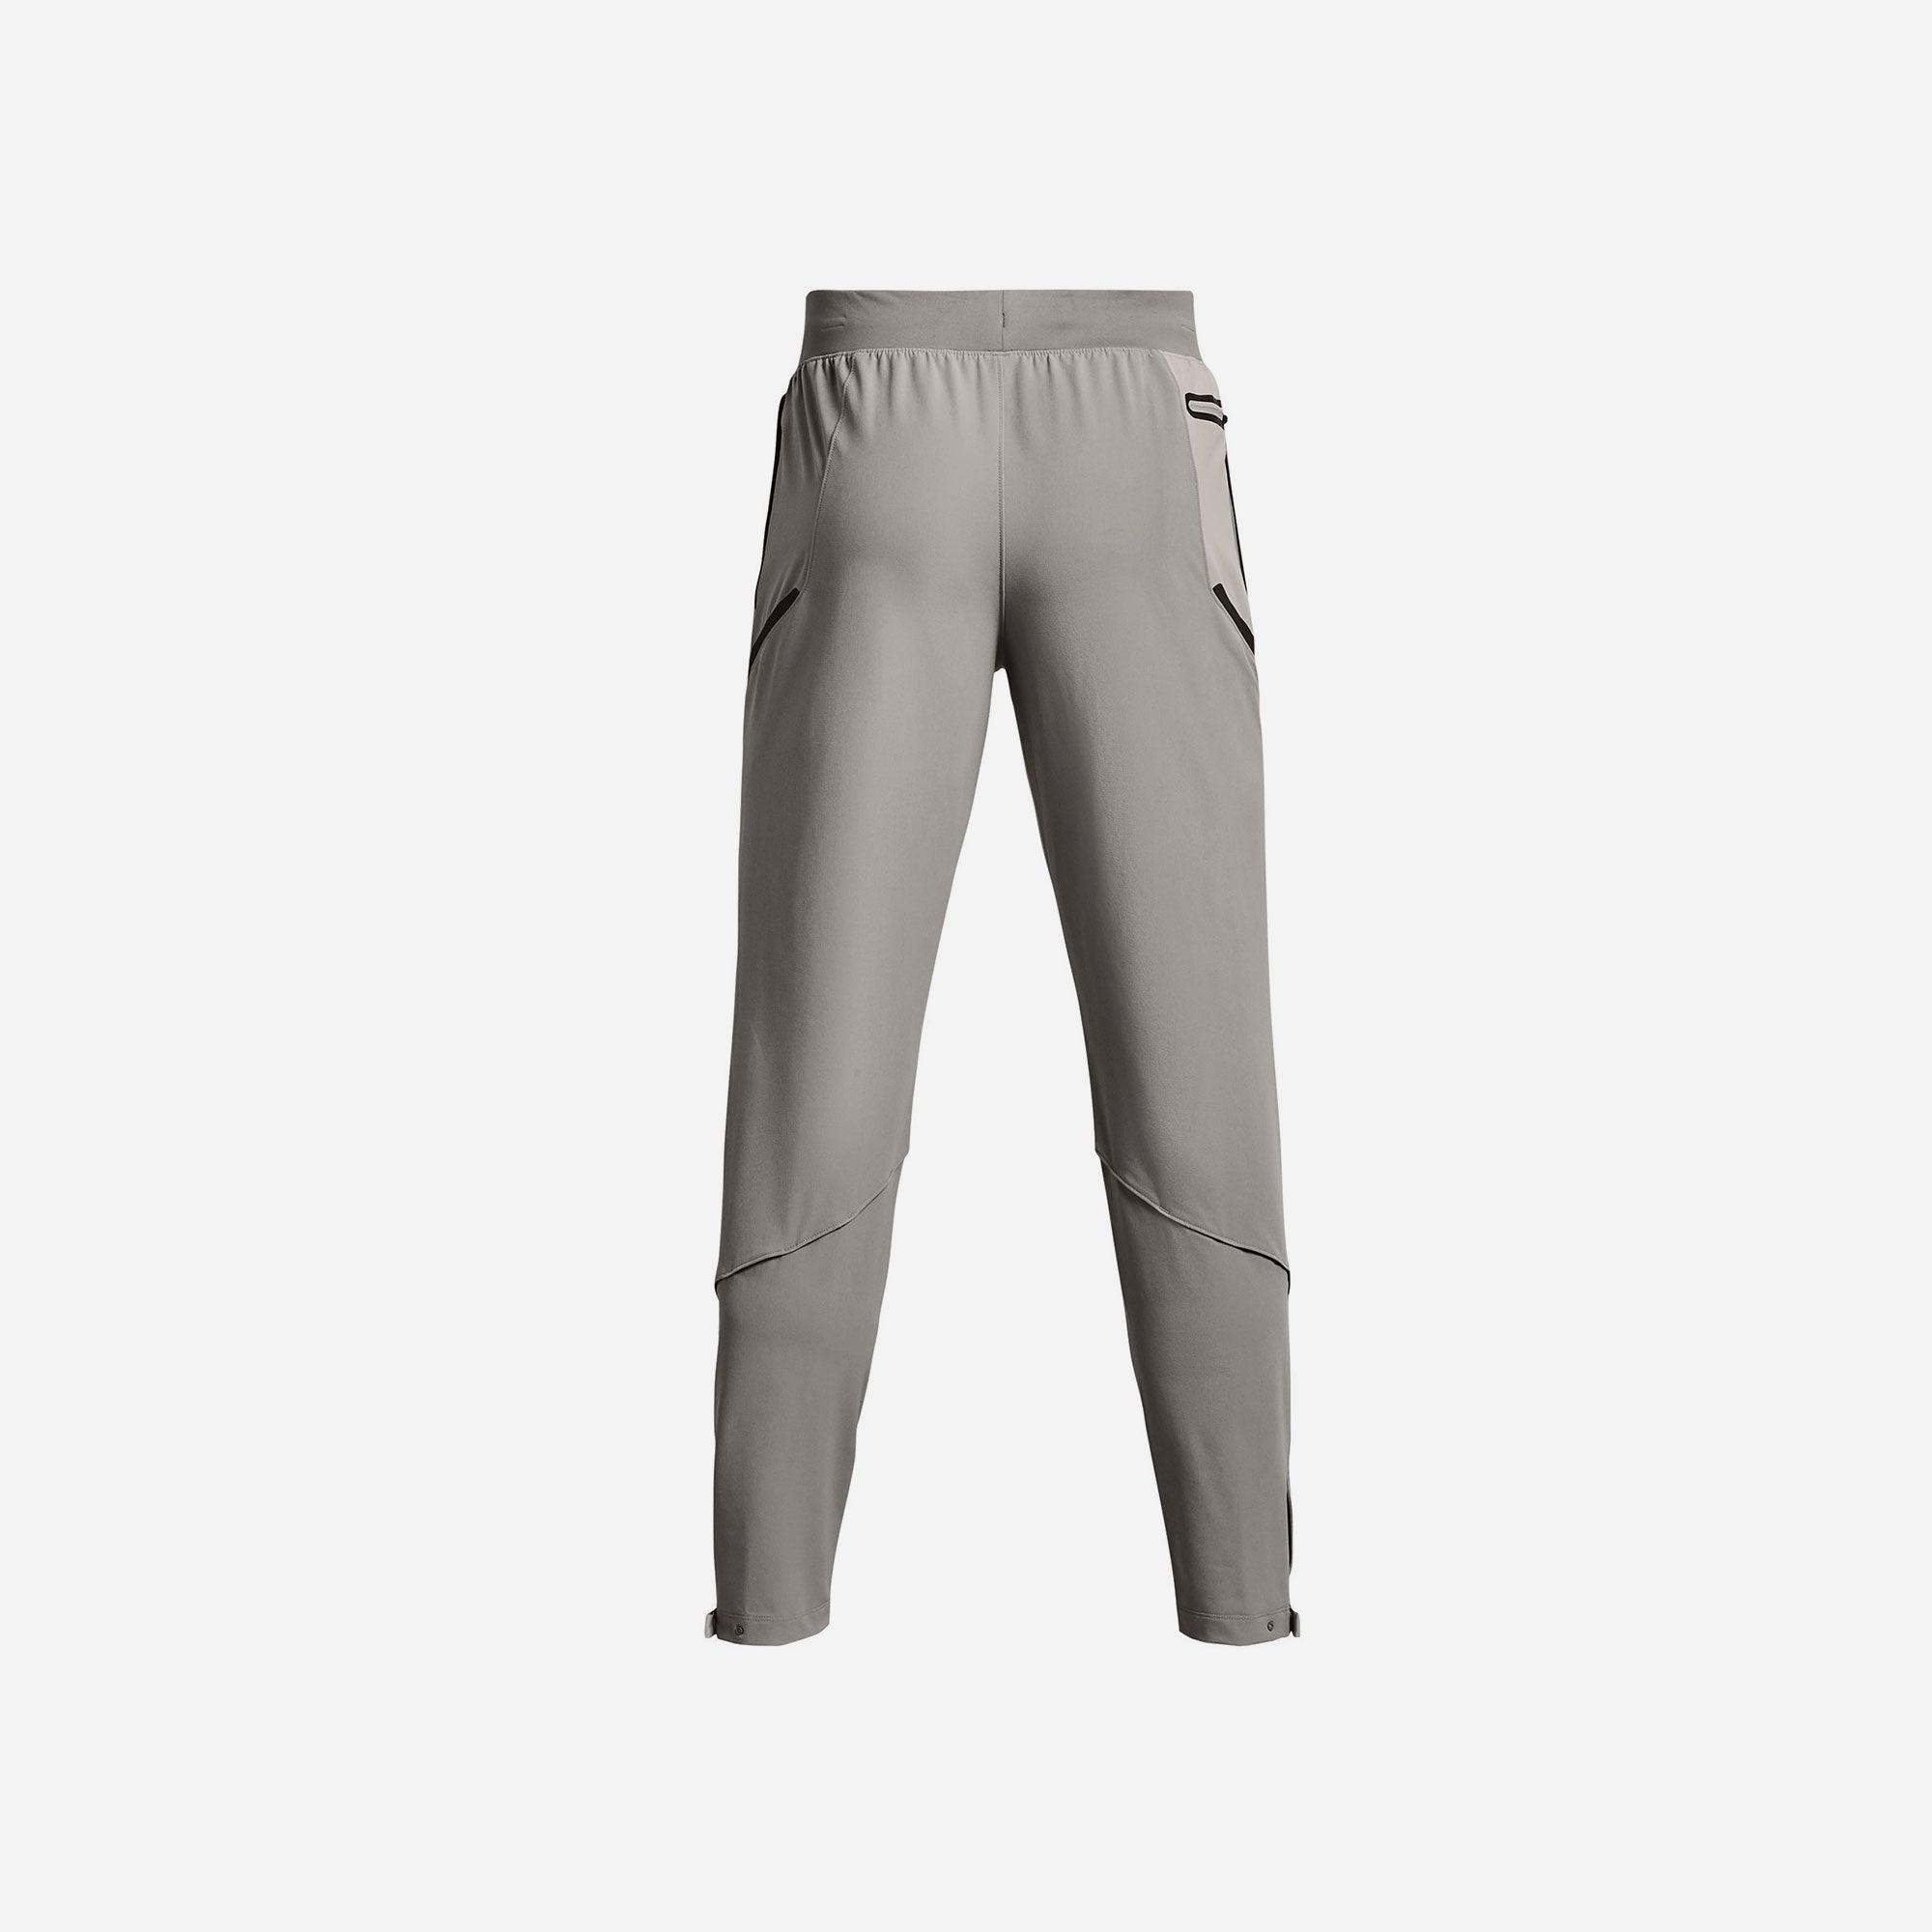 Quần dài thể thao nam Under Armour Wintrzd Unstoppable - 1375399-592